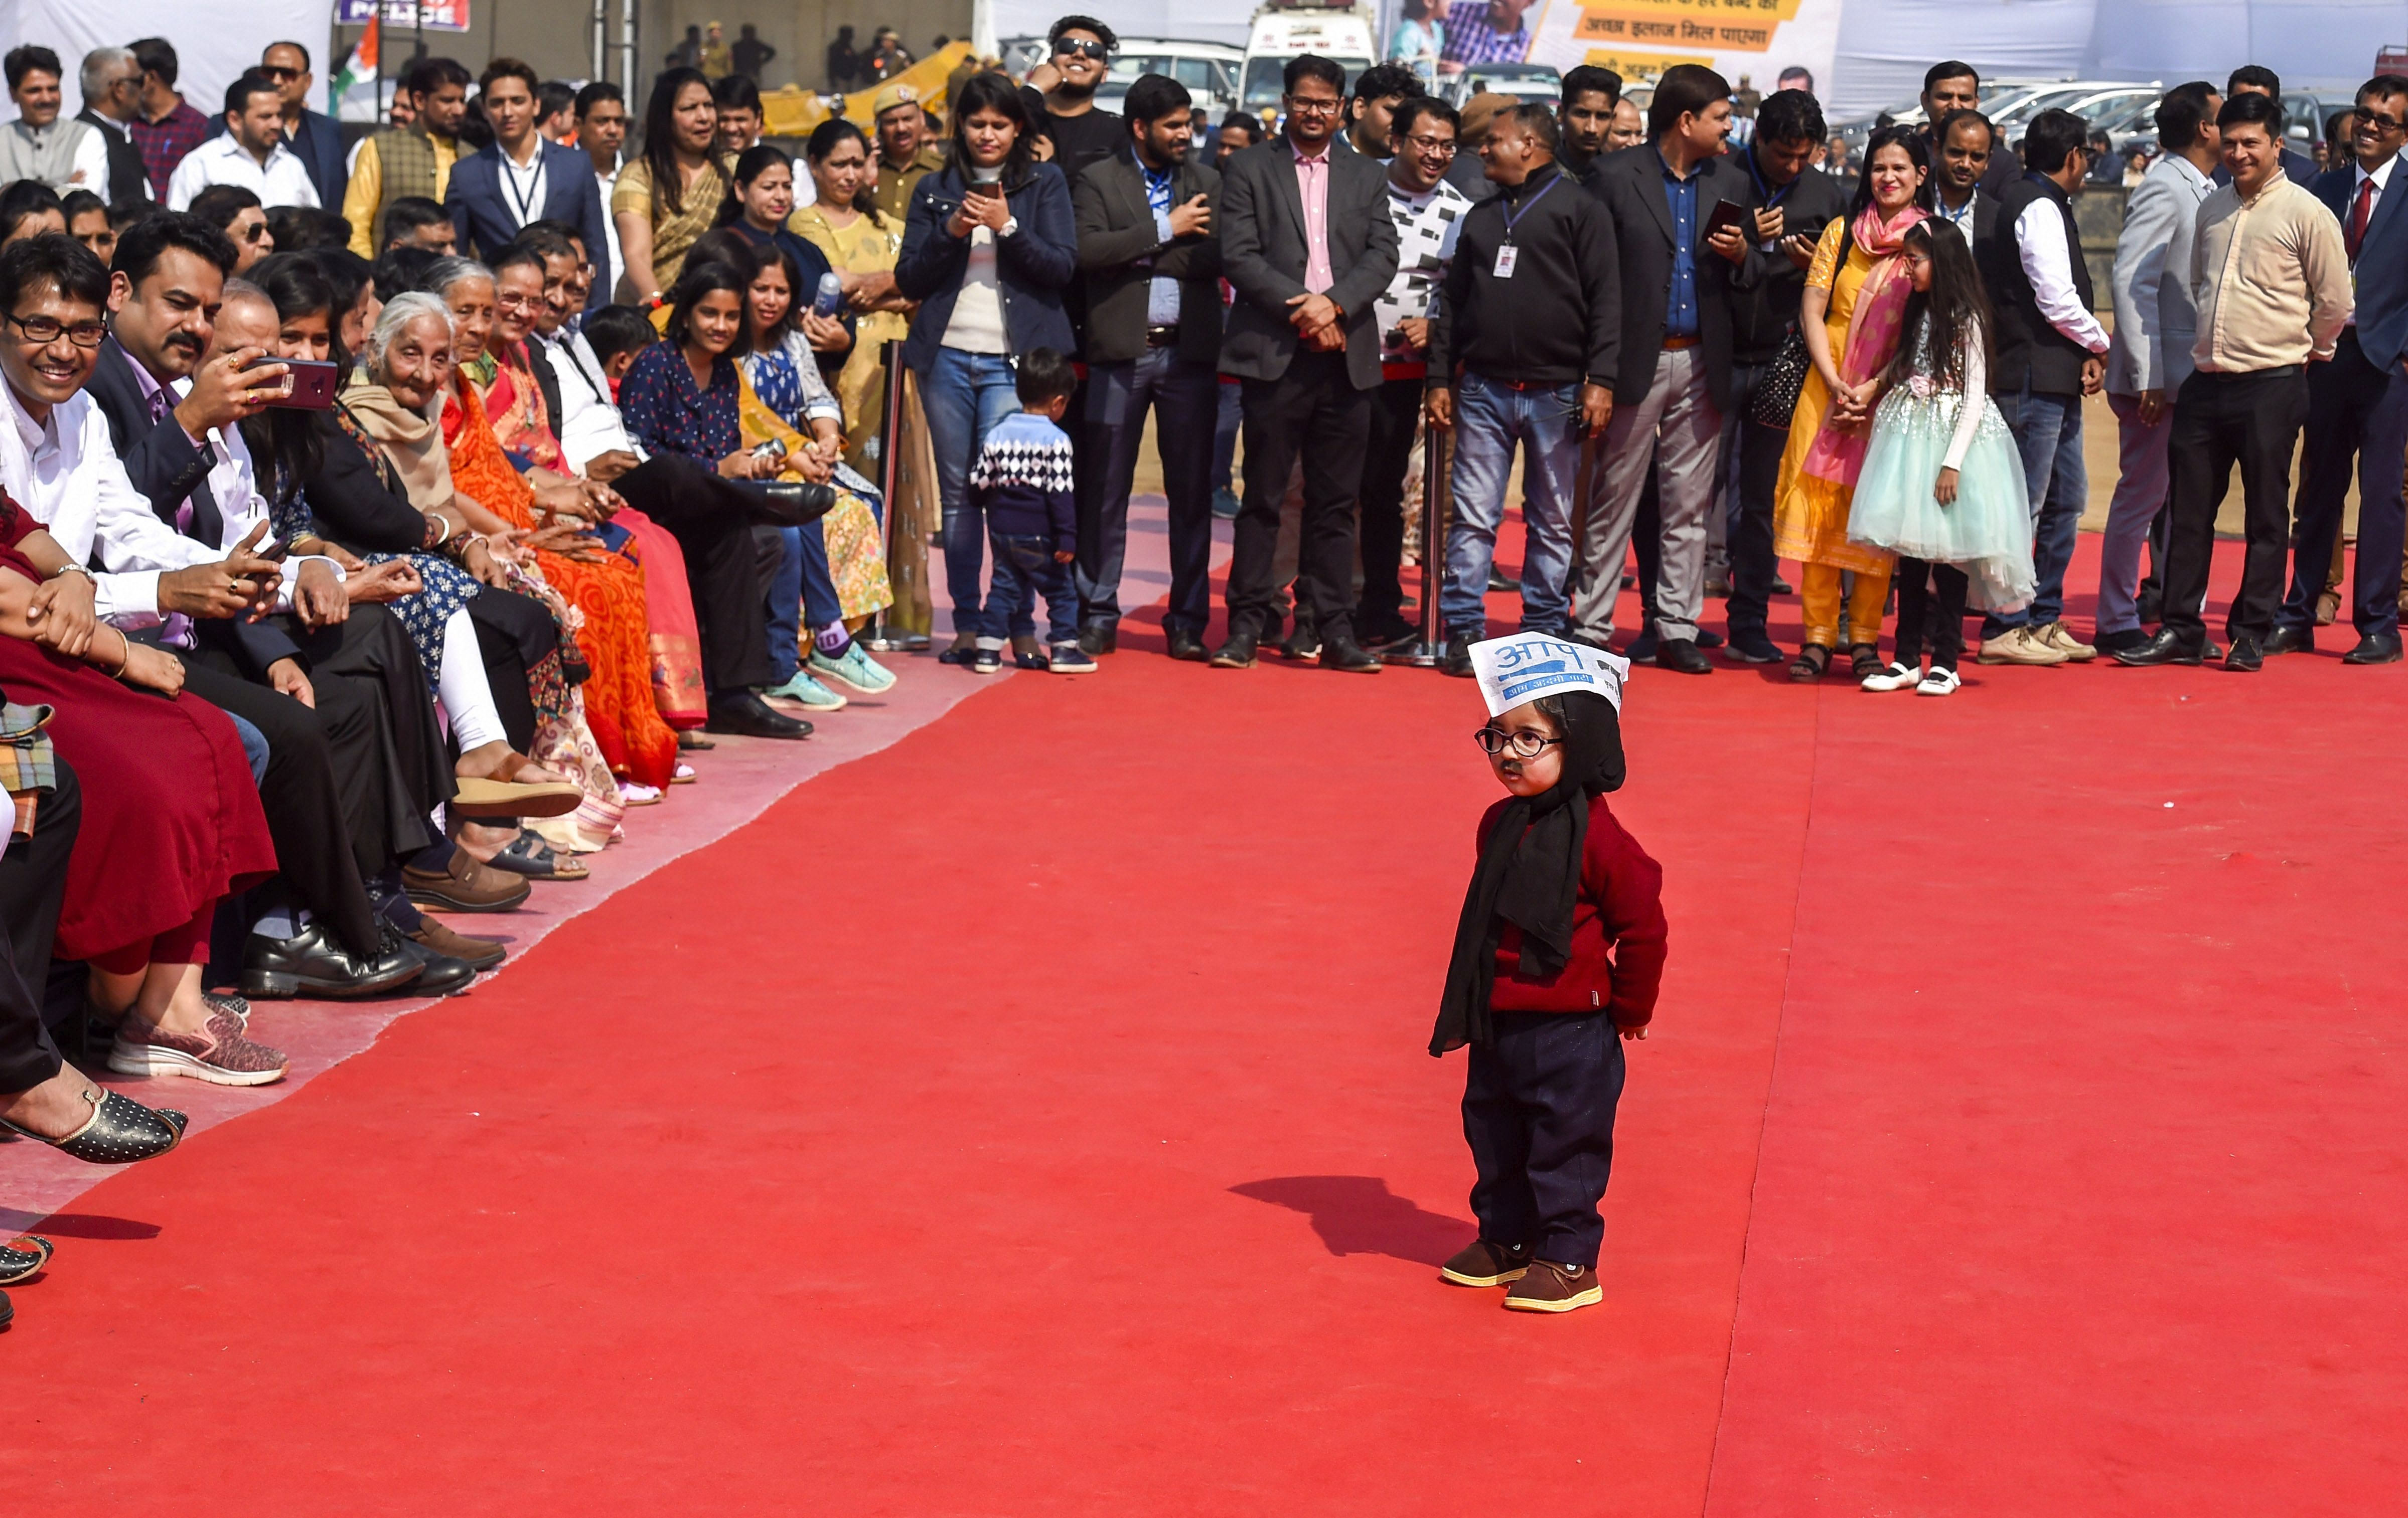 Kejriwals guests: Baby Mufflerman and an eclectic mix of Delhi builders